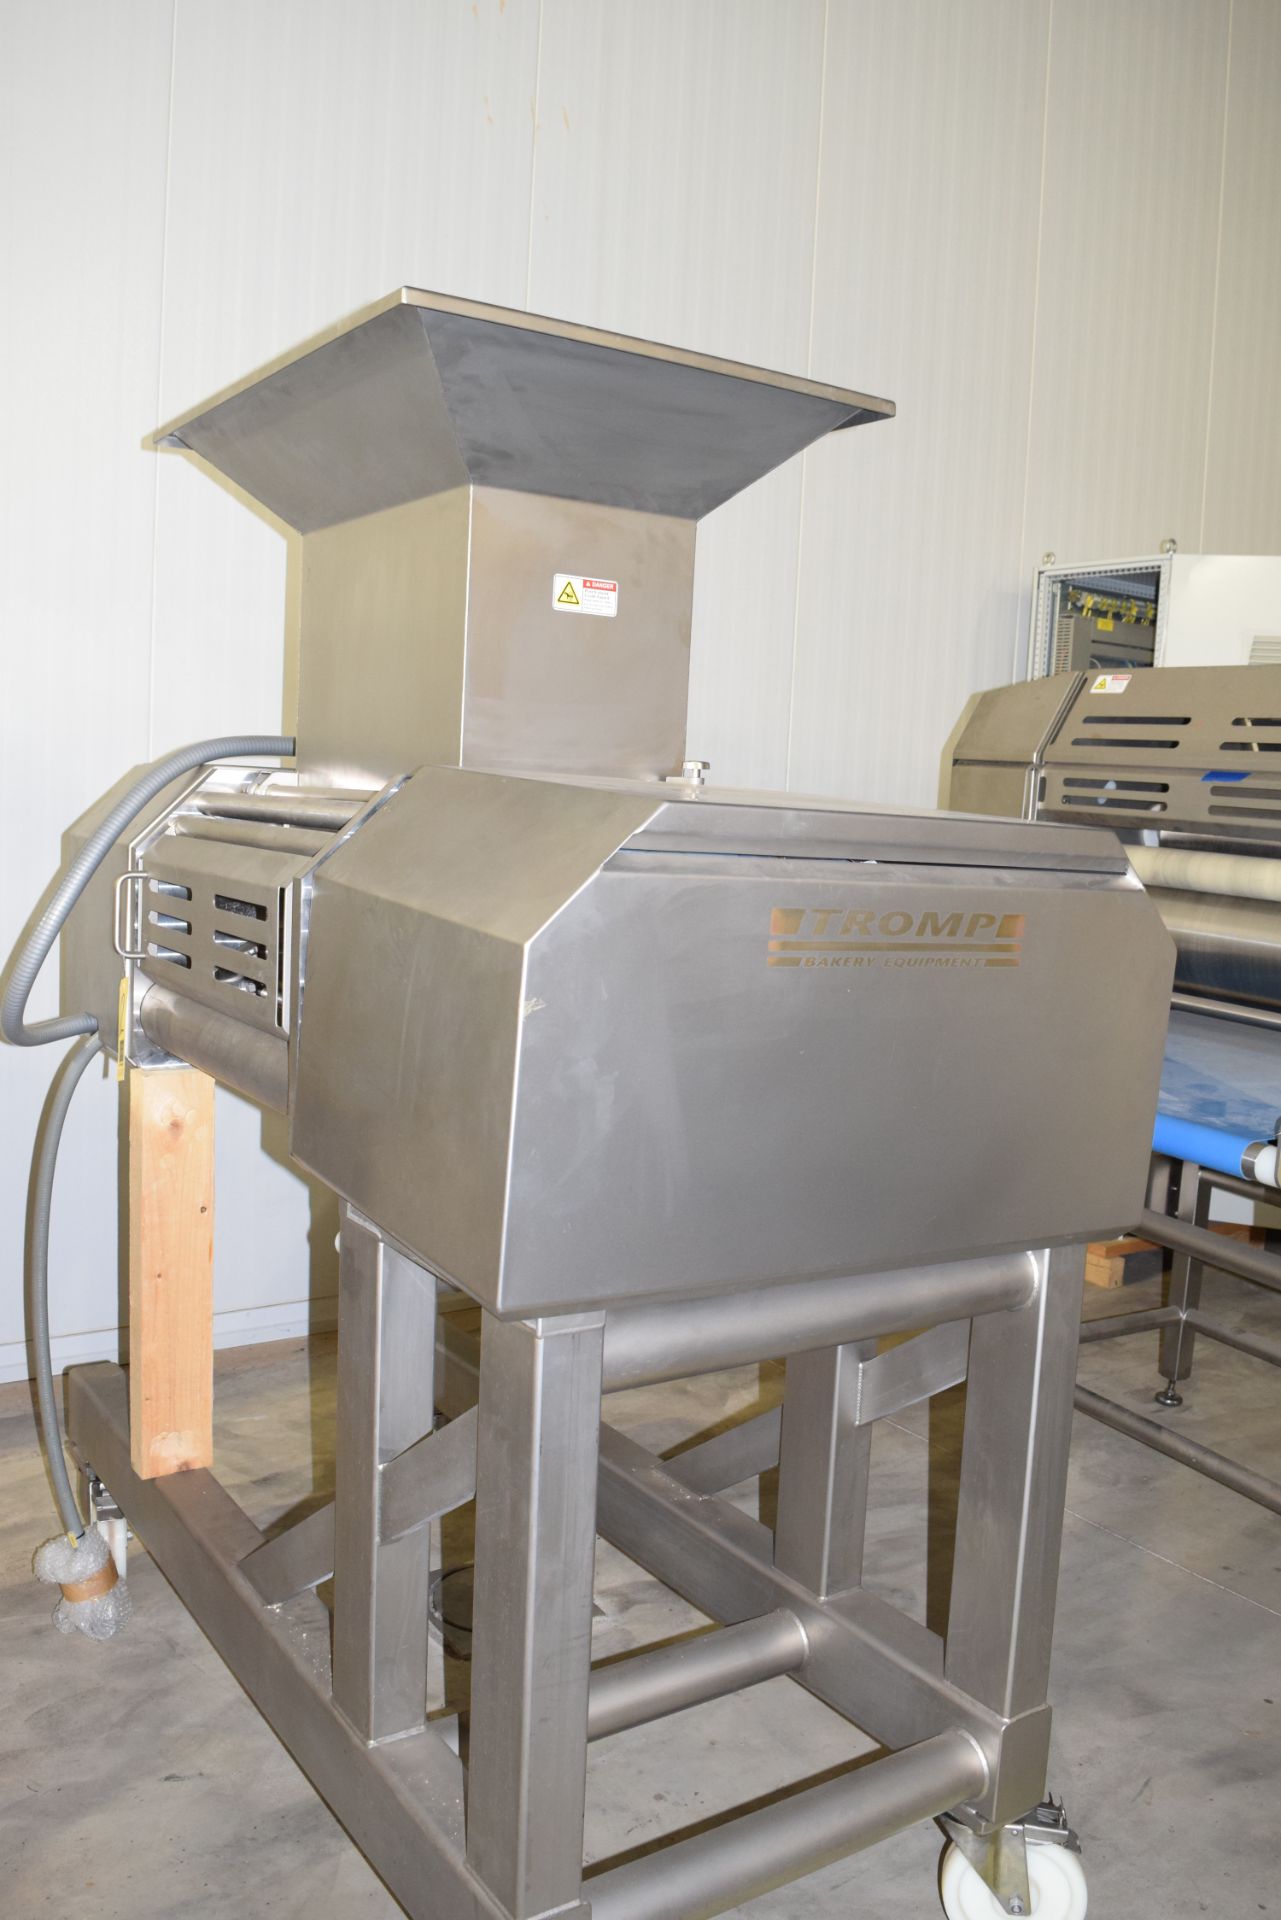 Tromp Bakery Systems, Three-Roll S/S Dough Extruder, Type 2M600, Working with 600 MM Rollers